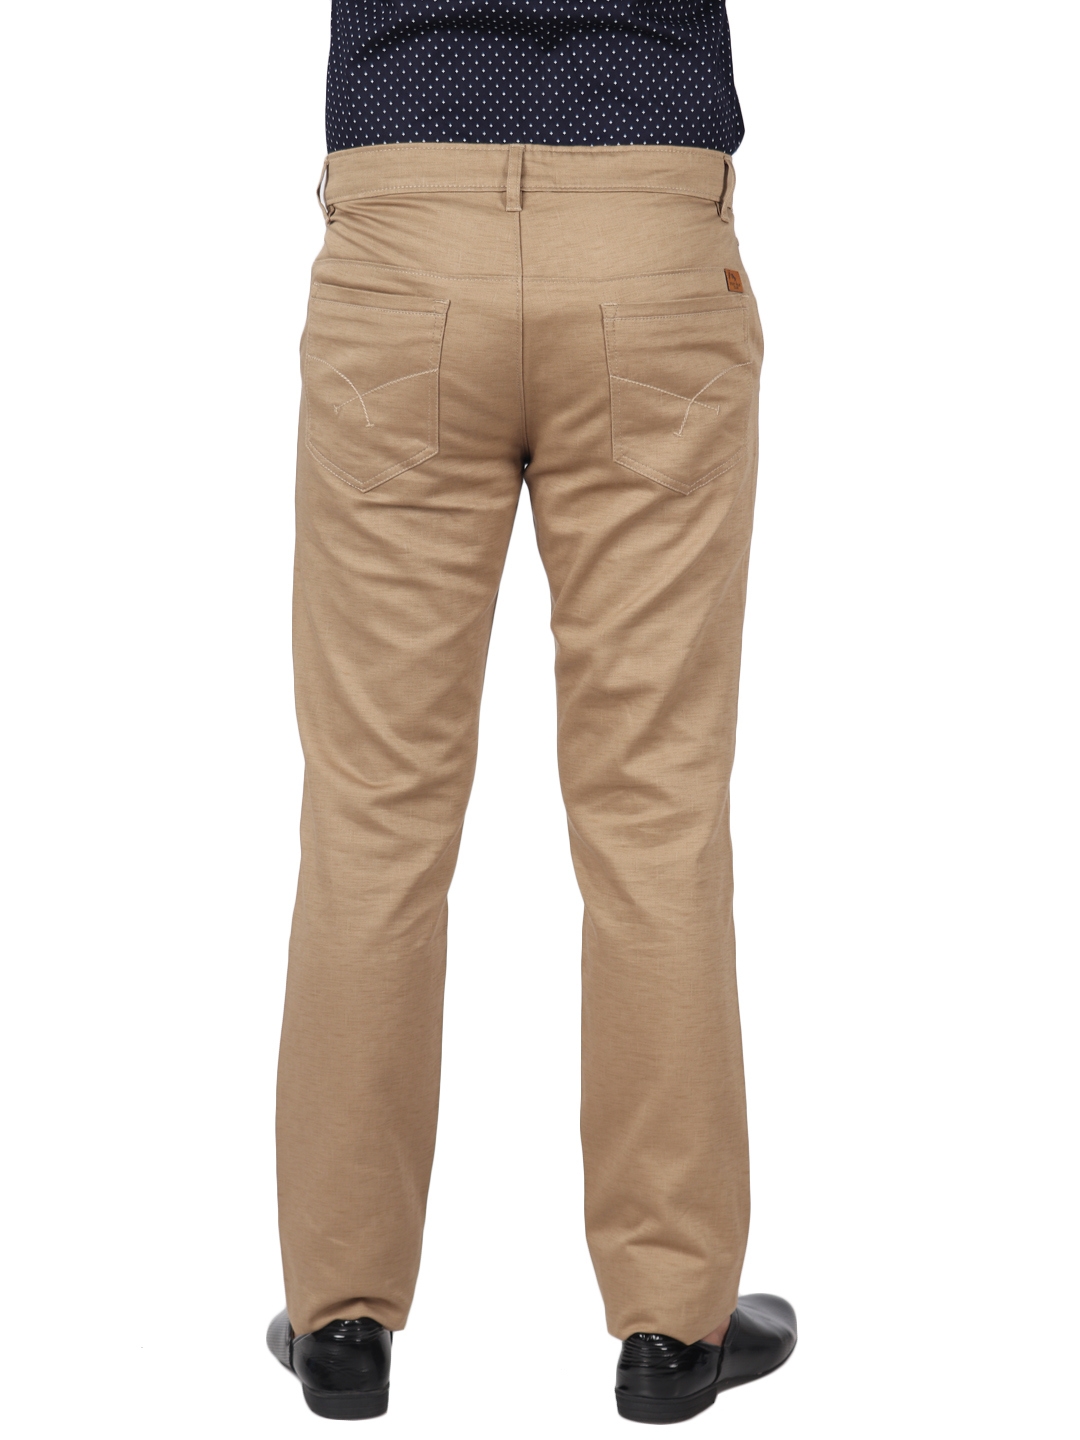 D'cot by Donear | D'cot by Donear Men's Brown Cotton Trousers 2